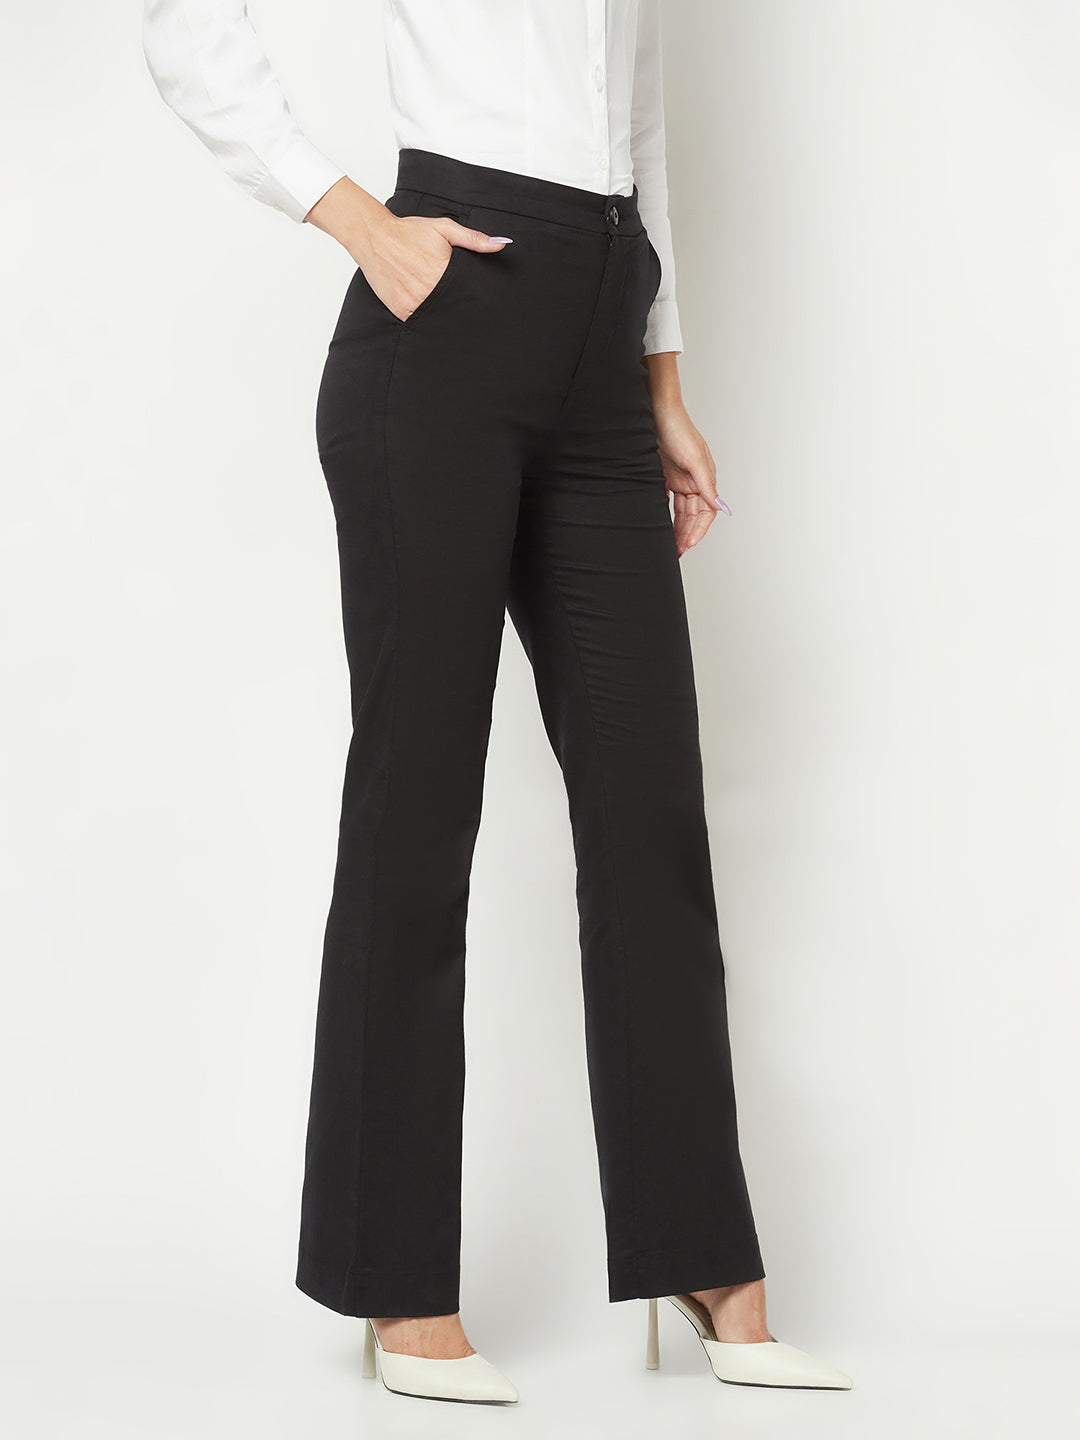 Discover 80+ black bootcut trousers with pockets super hot - in.duhocakina